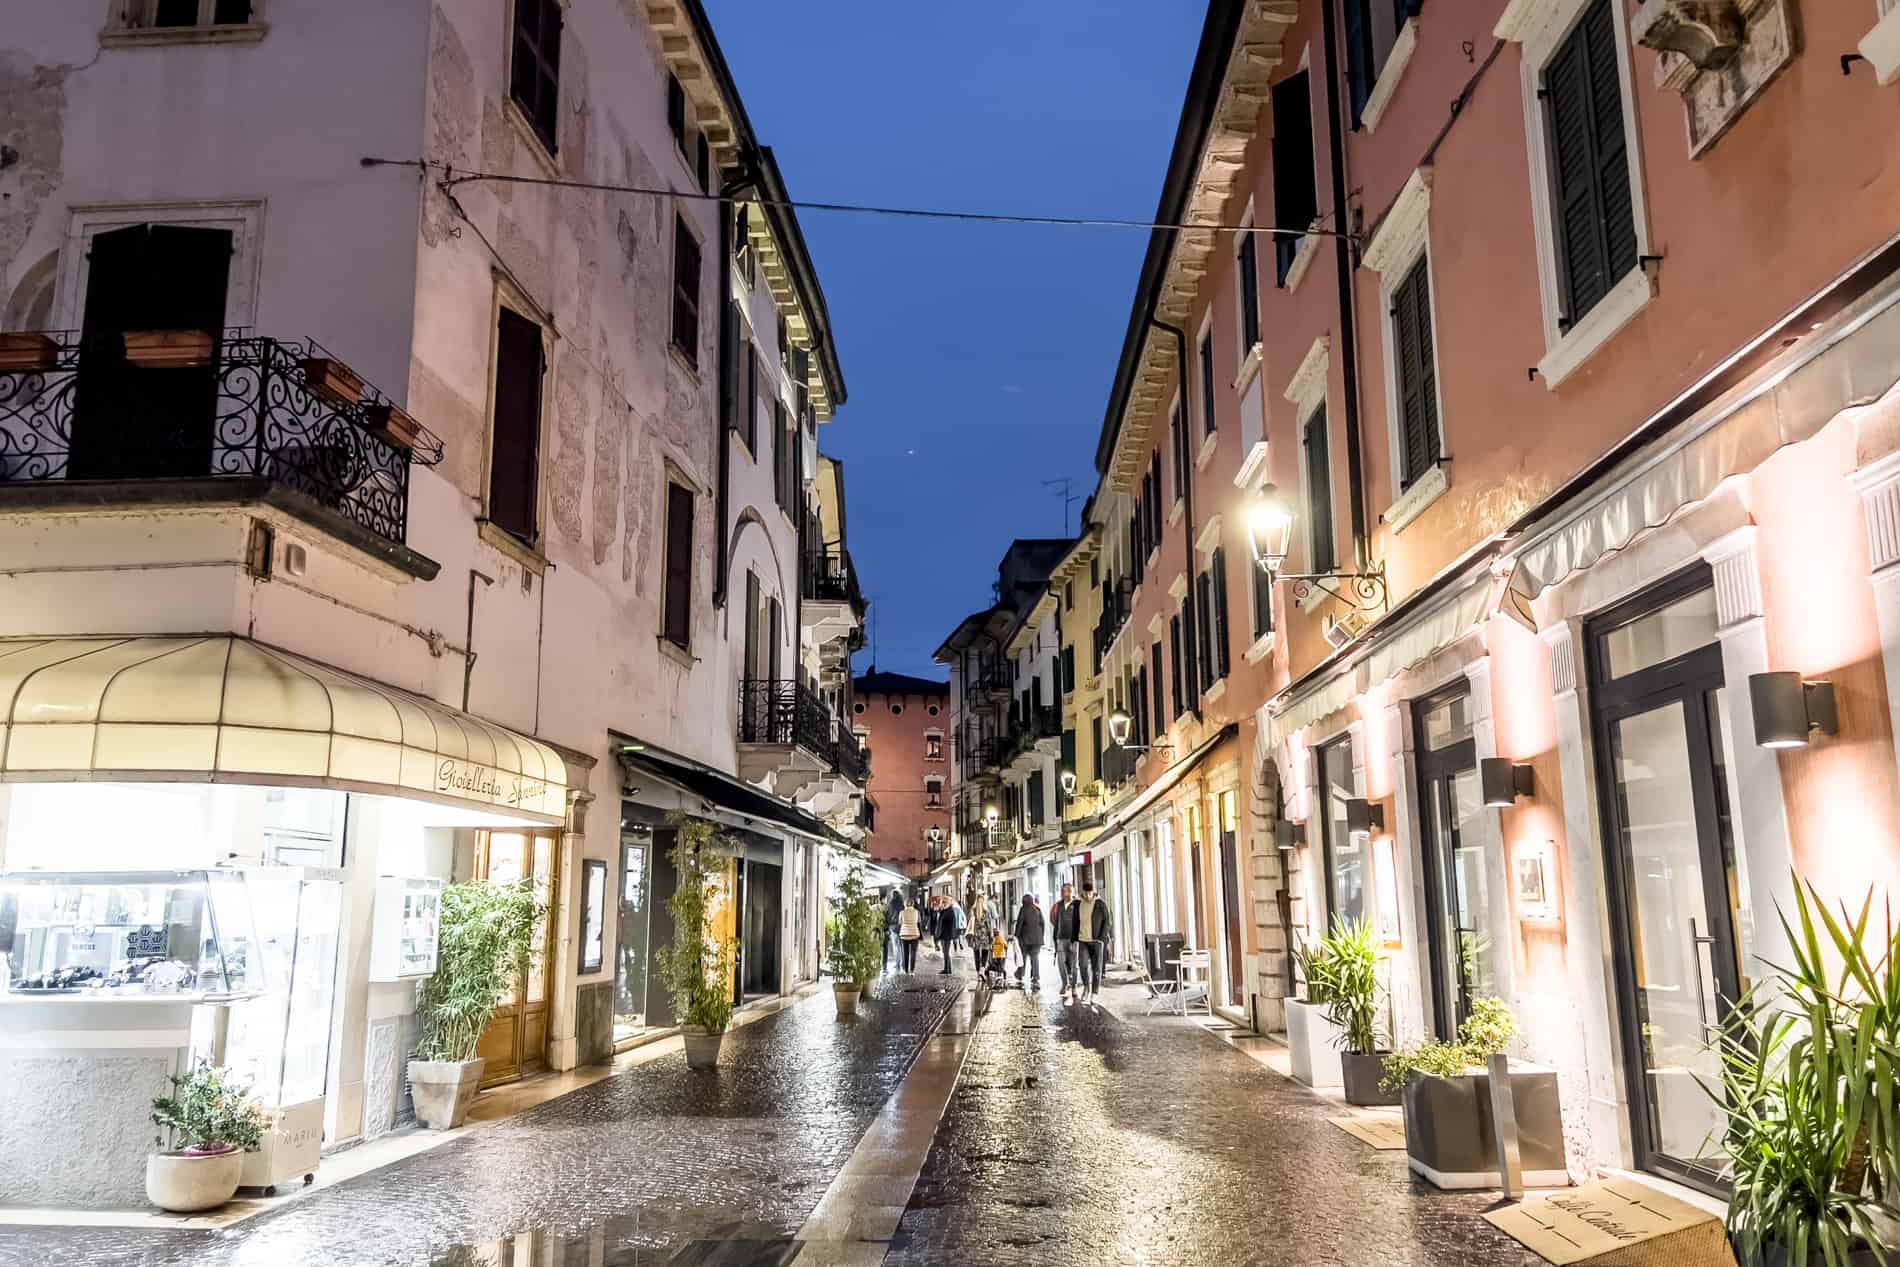 People walking through the narrow stone pastel hued streets of Peschiera del Garda at night, lit up in a yellow glow.